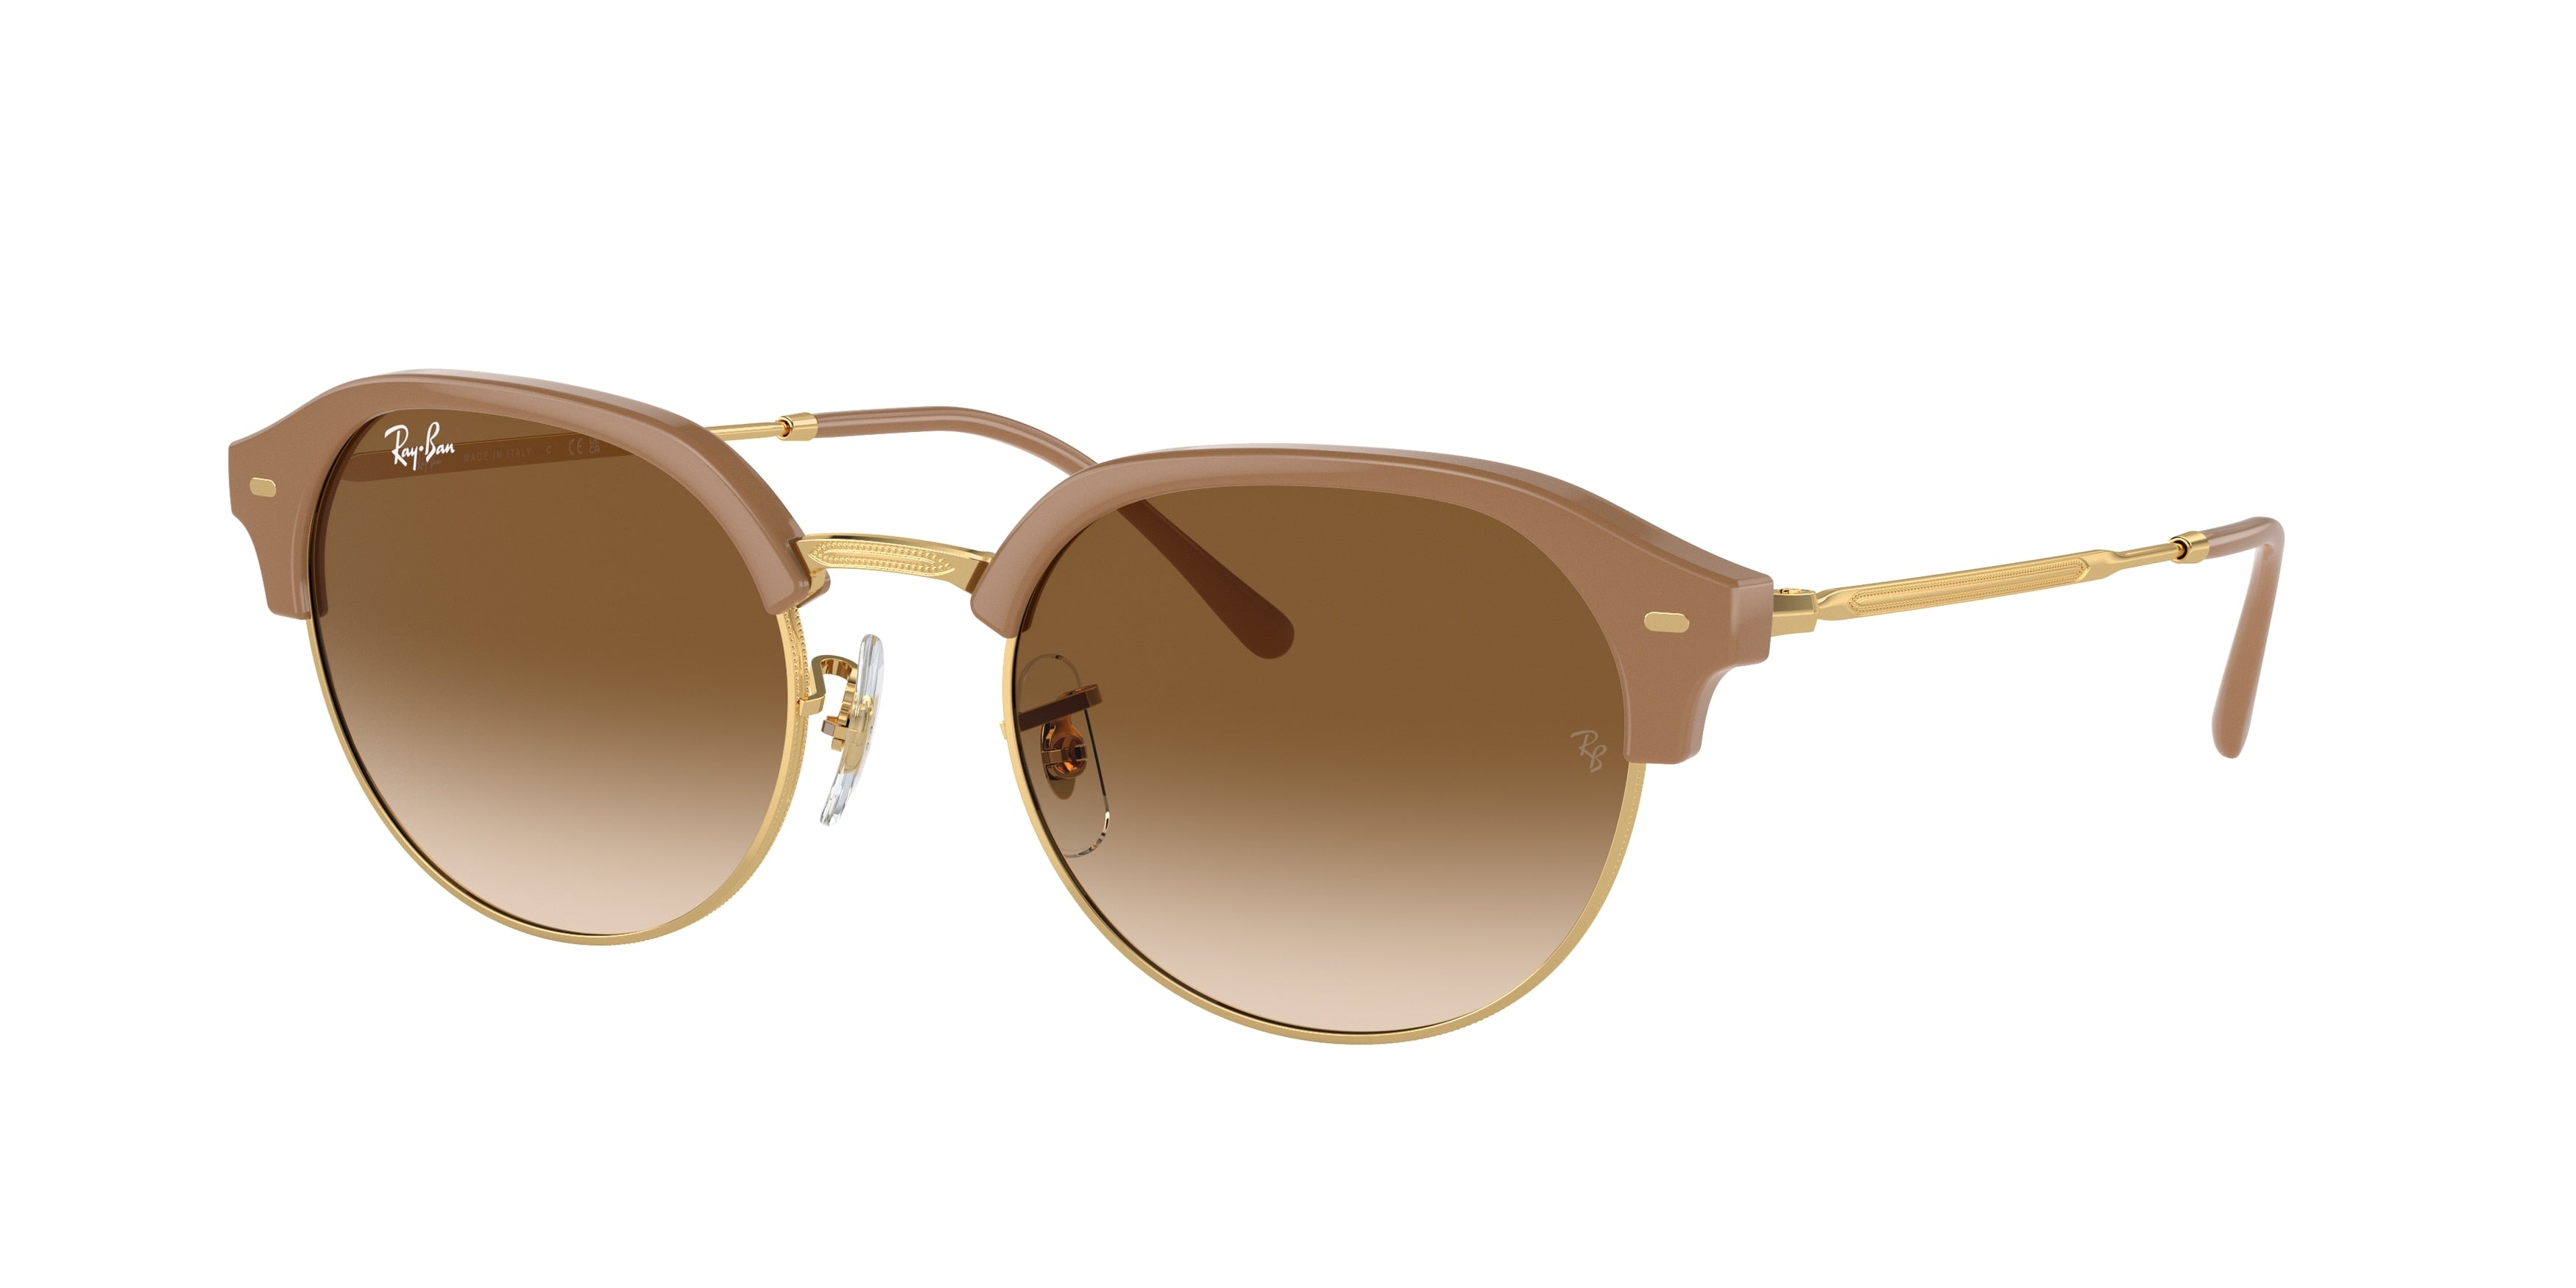 Ray-Ban RB4429 Irregular Sunglasses  672151-Beige On Gold 55-145-20 - Color Map Beige